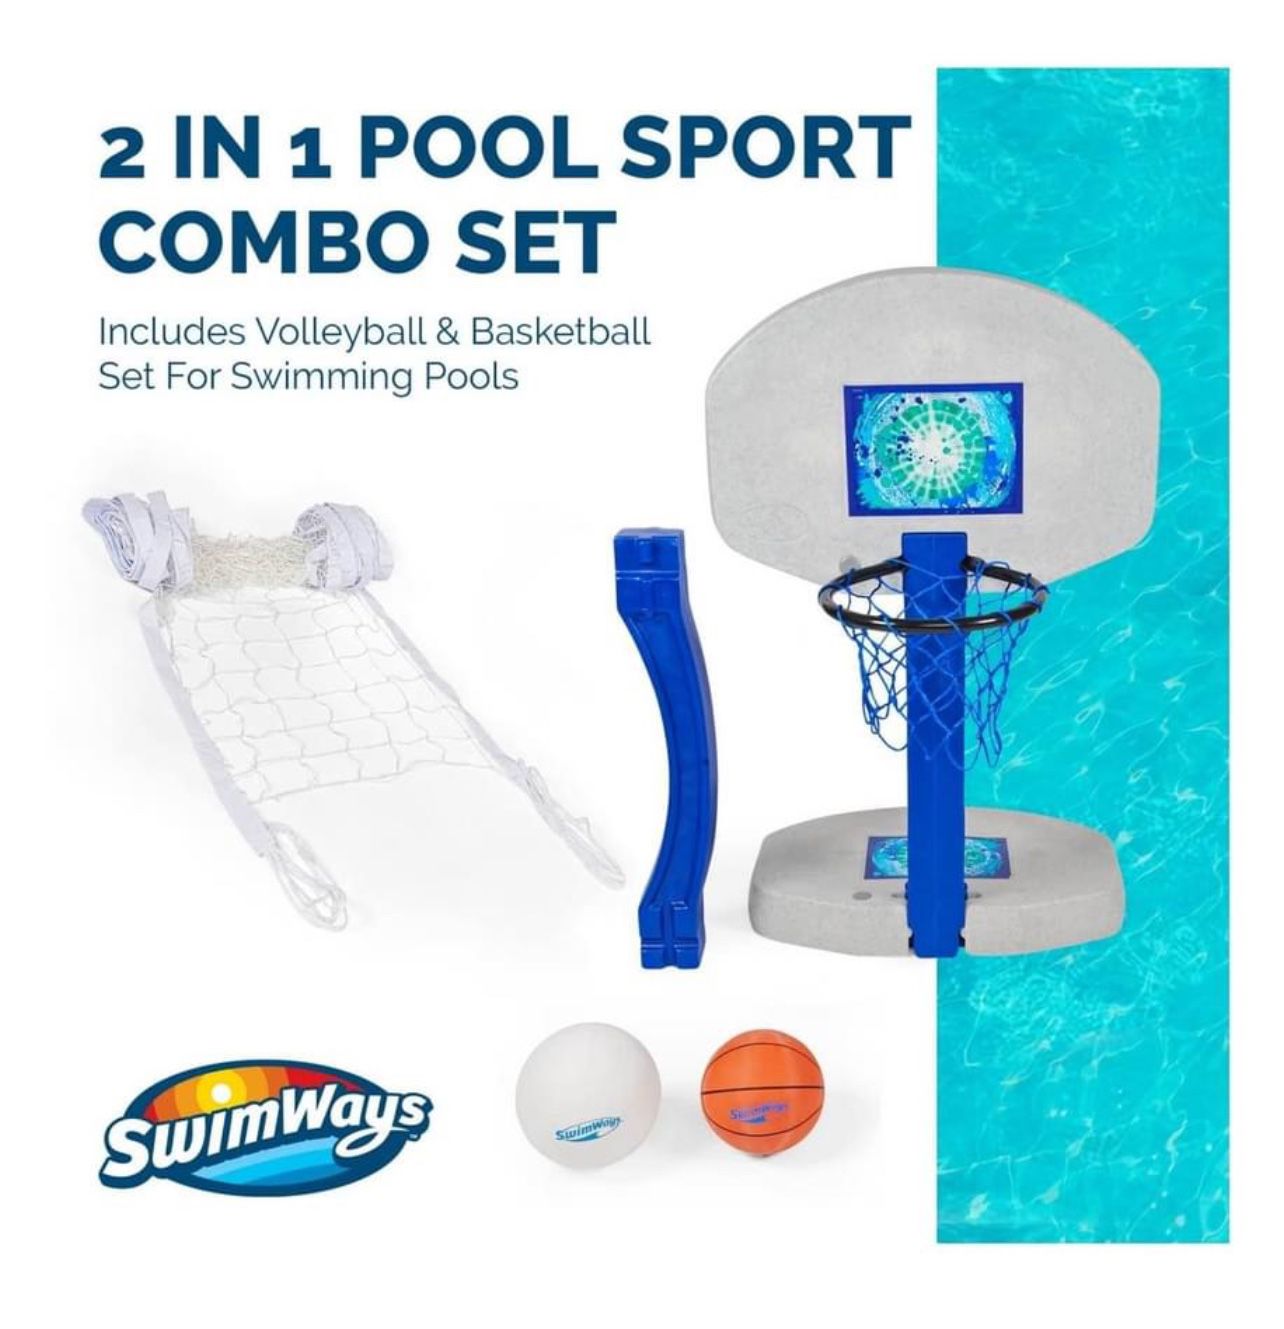 2-in-1 Pool Sport Combo Set - Volleyball Net & Outdoor Basketball Hoop For In- & Above Ground Pool